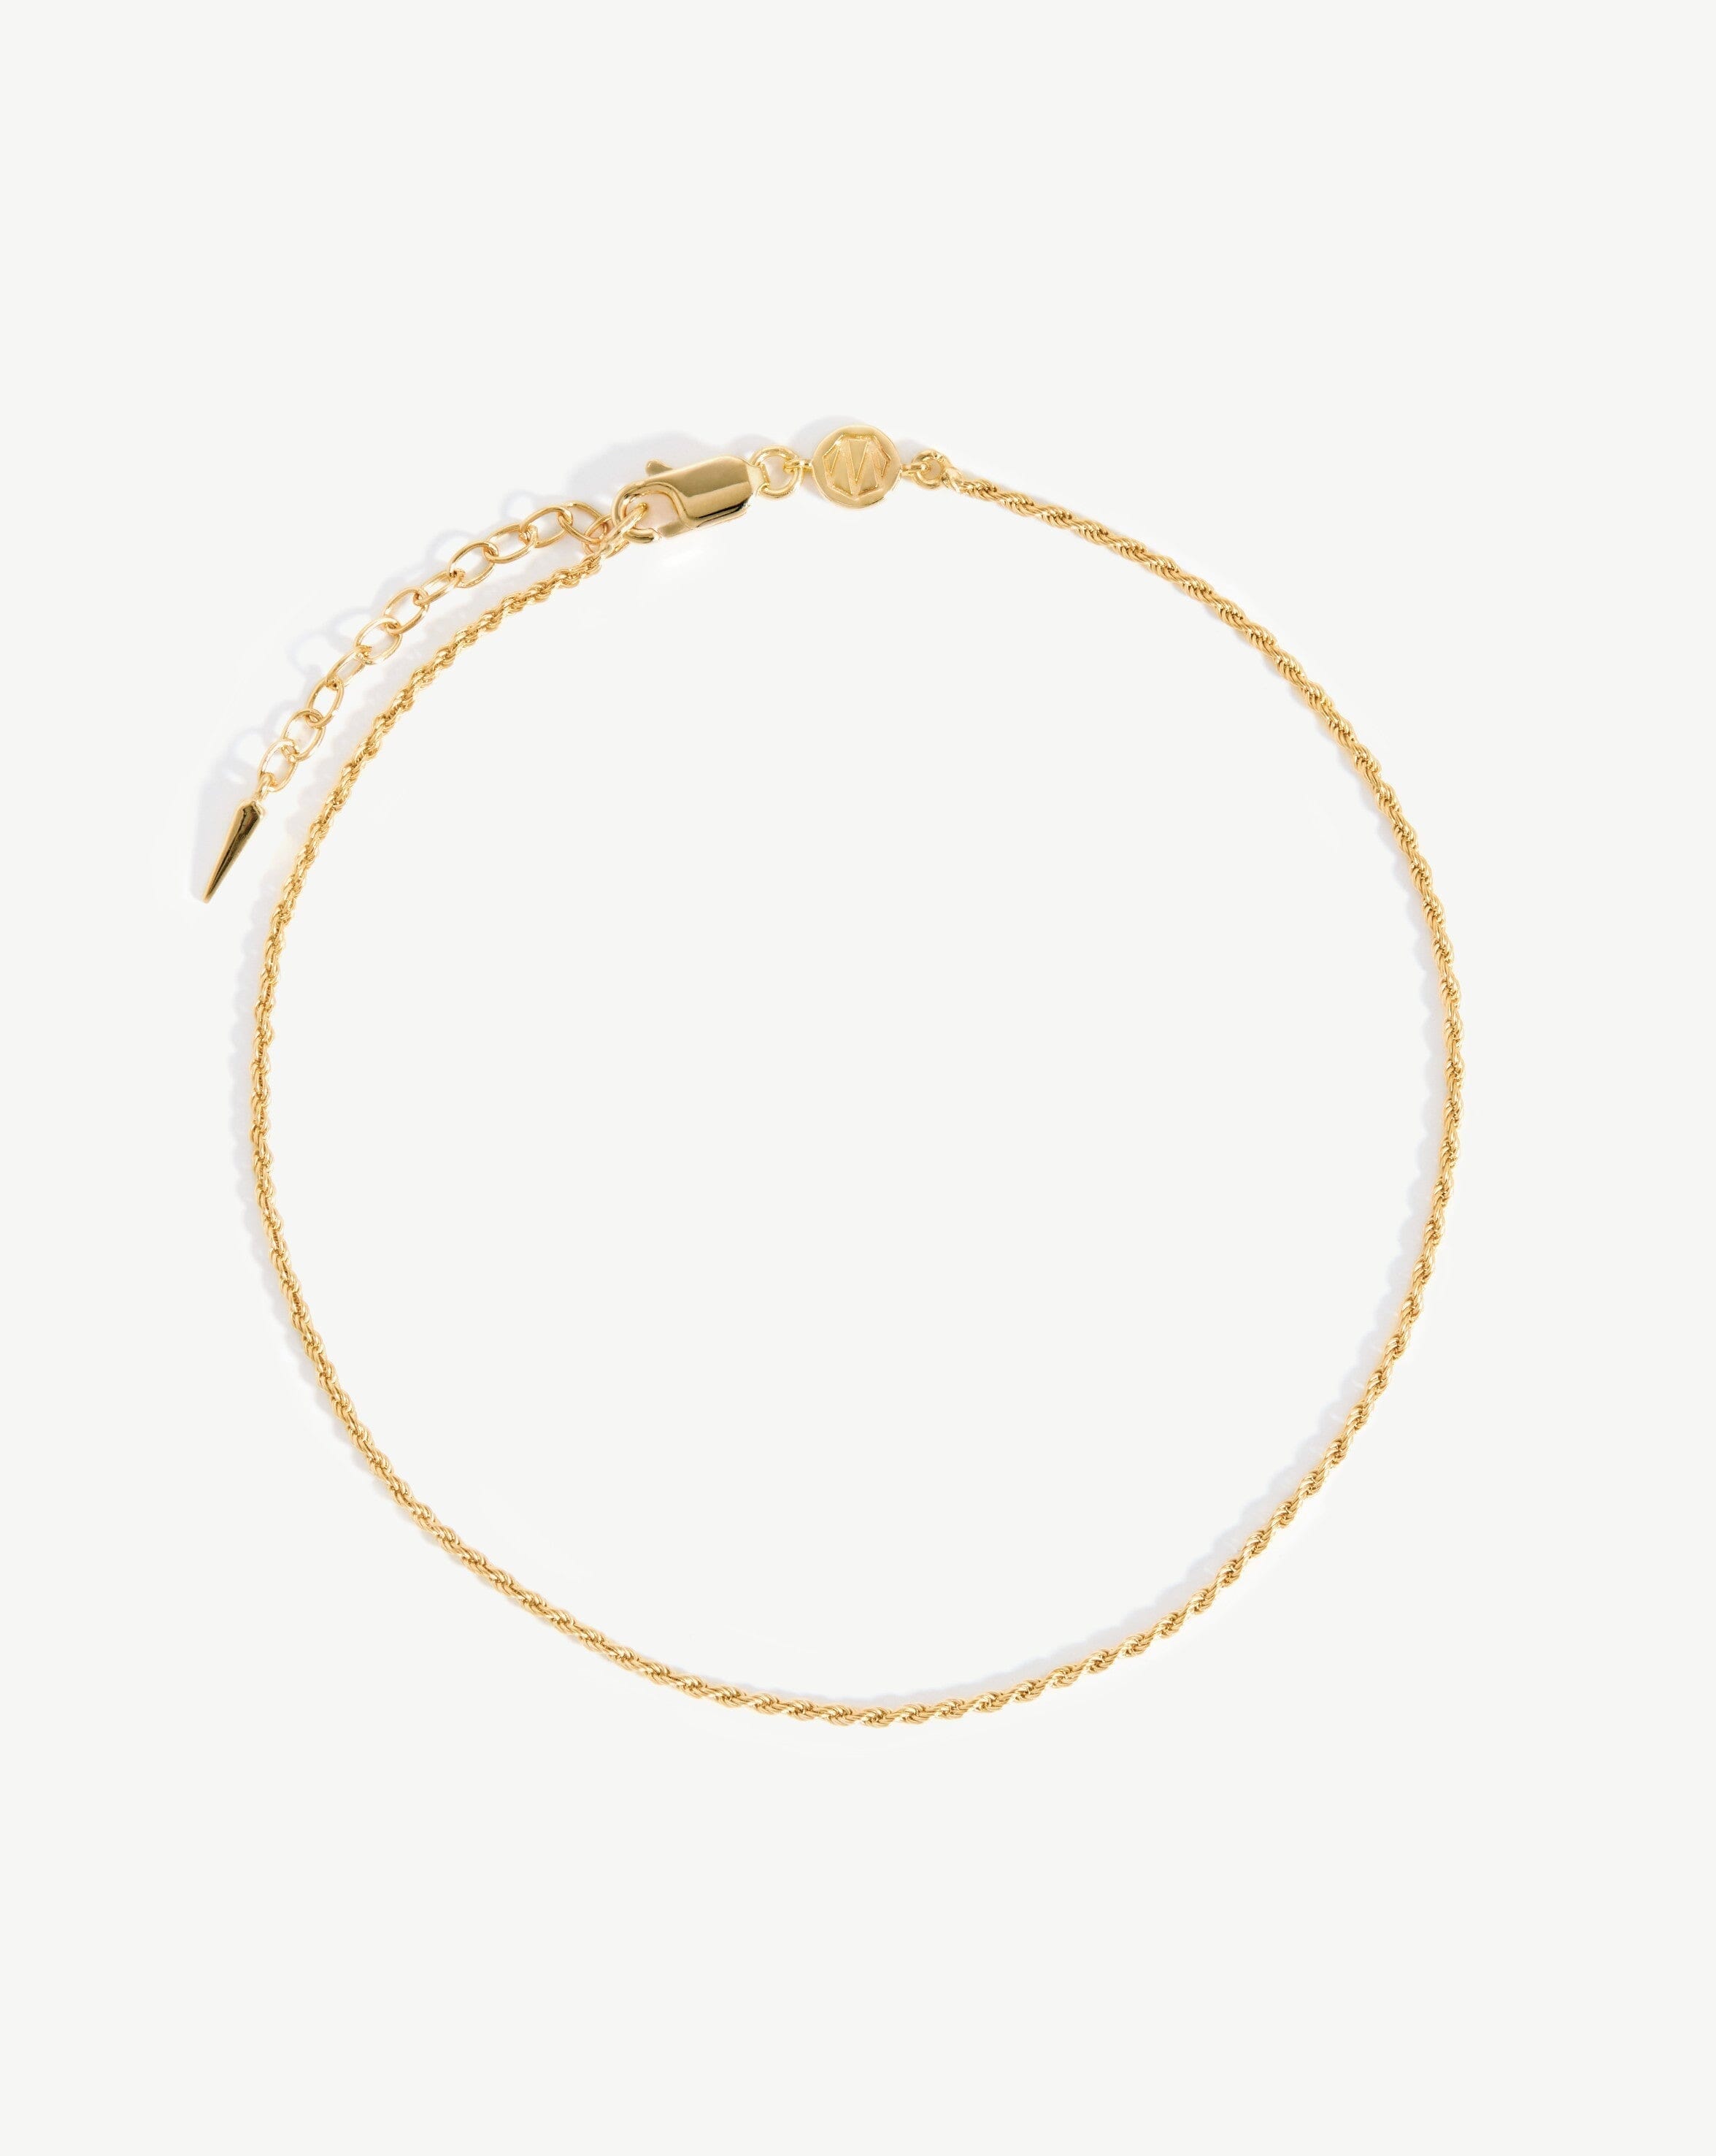 Lucy Williams Rope Anklet Anklets Missoma 